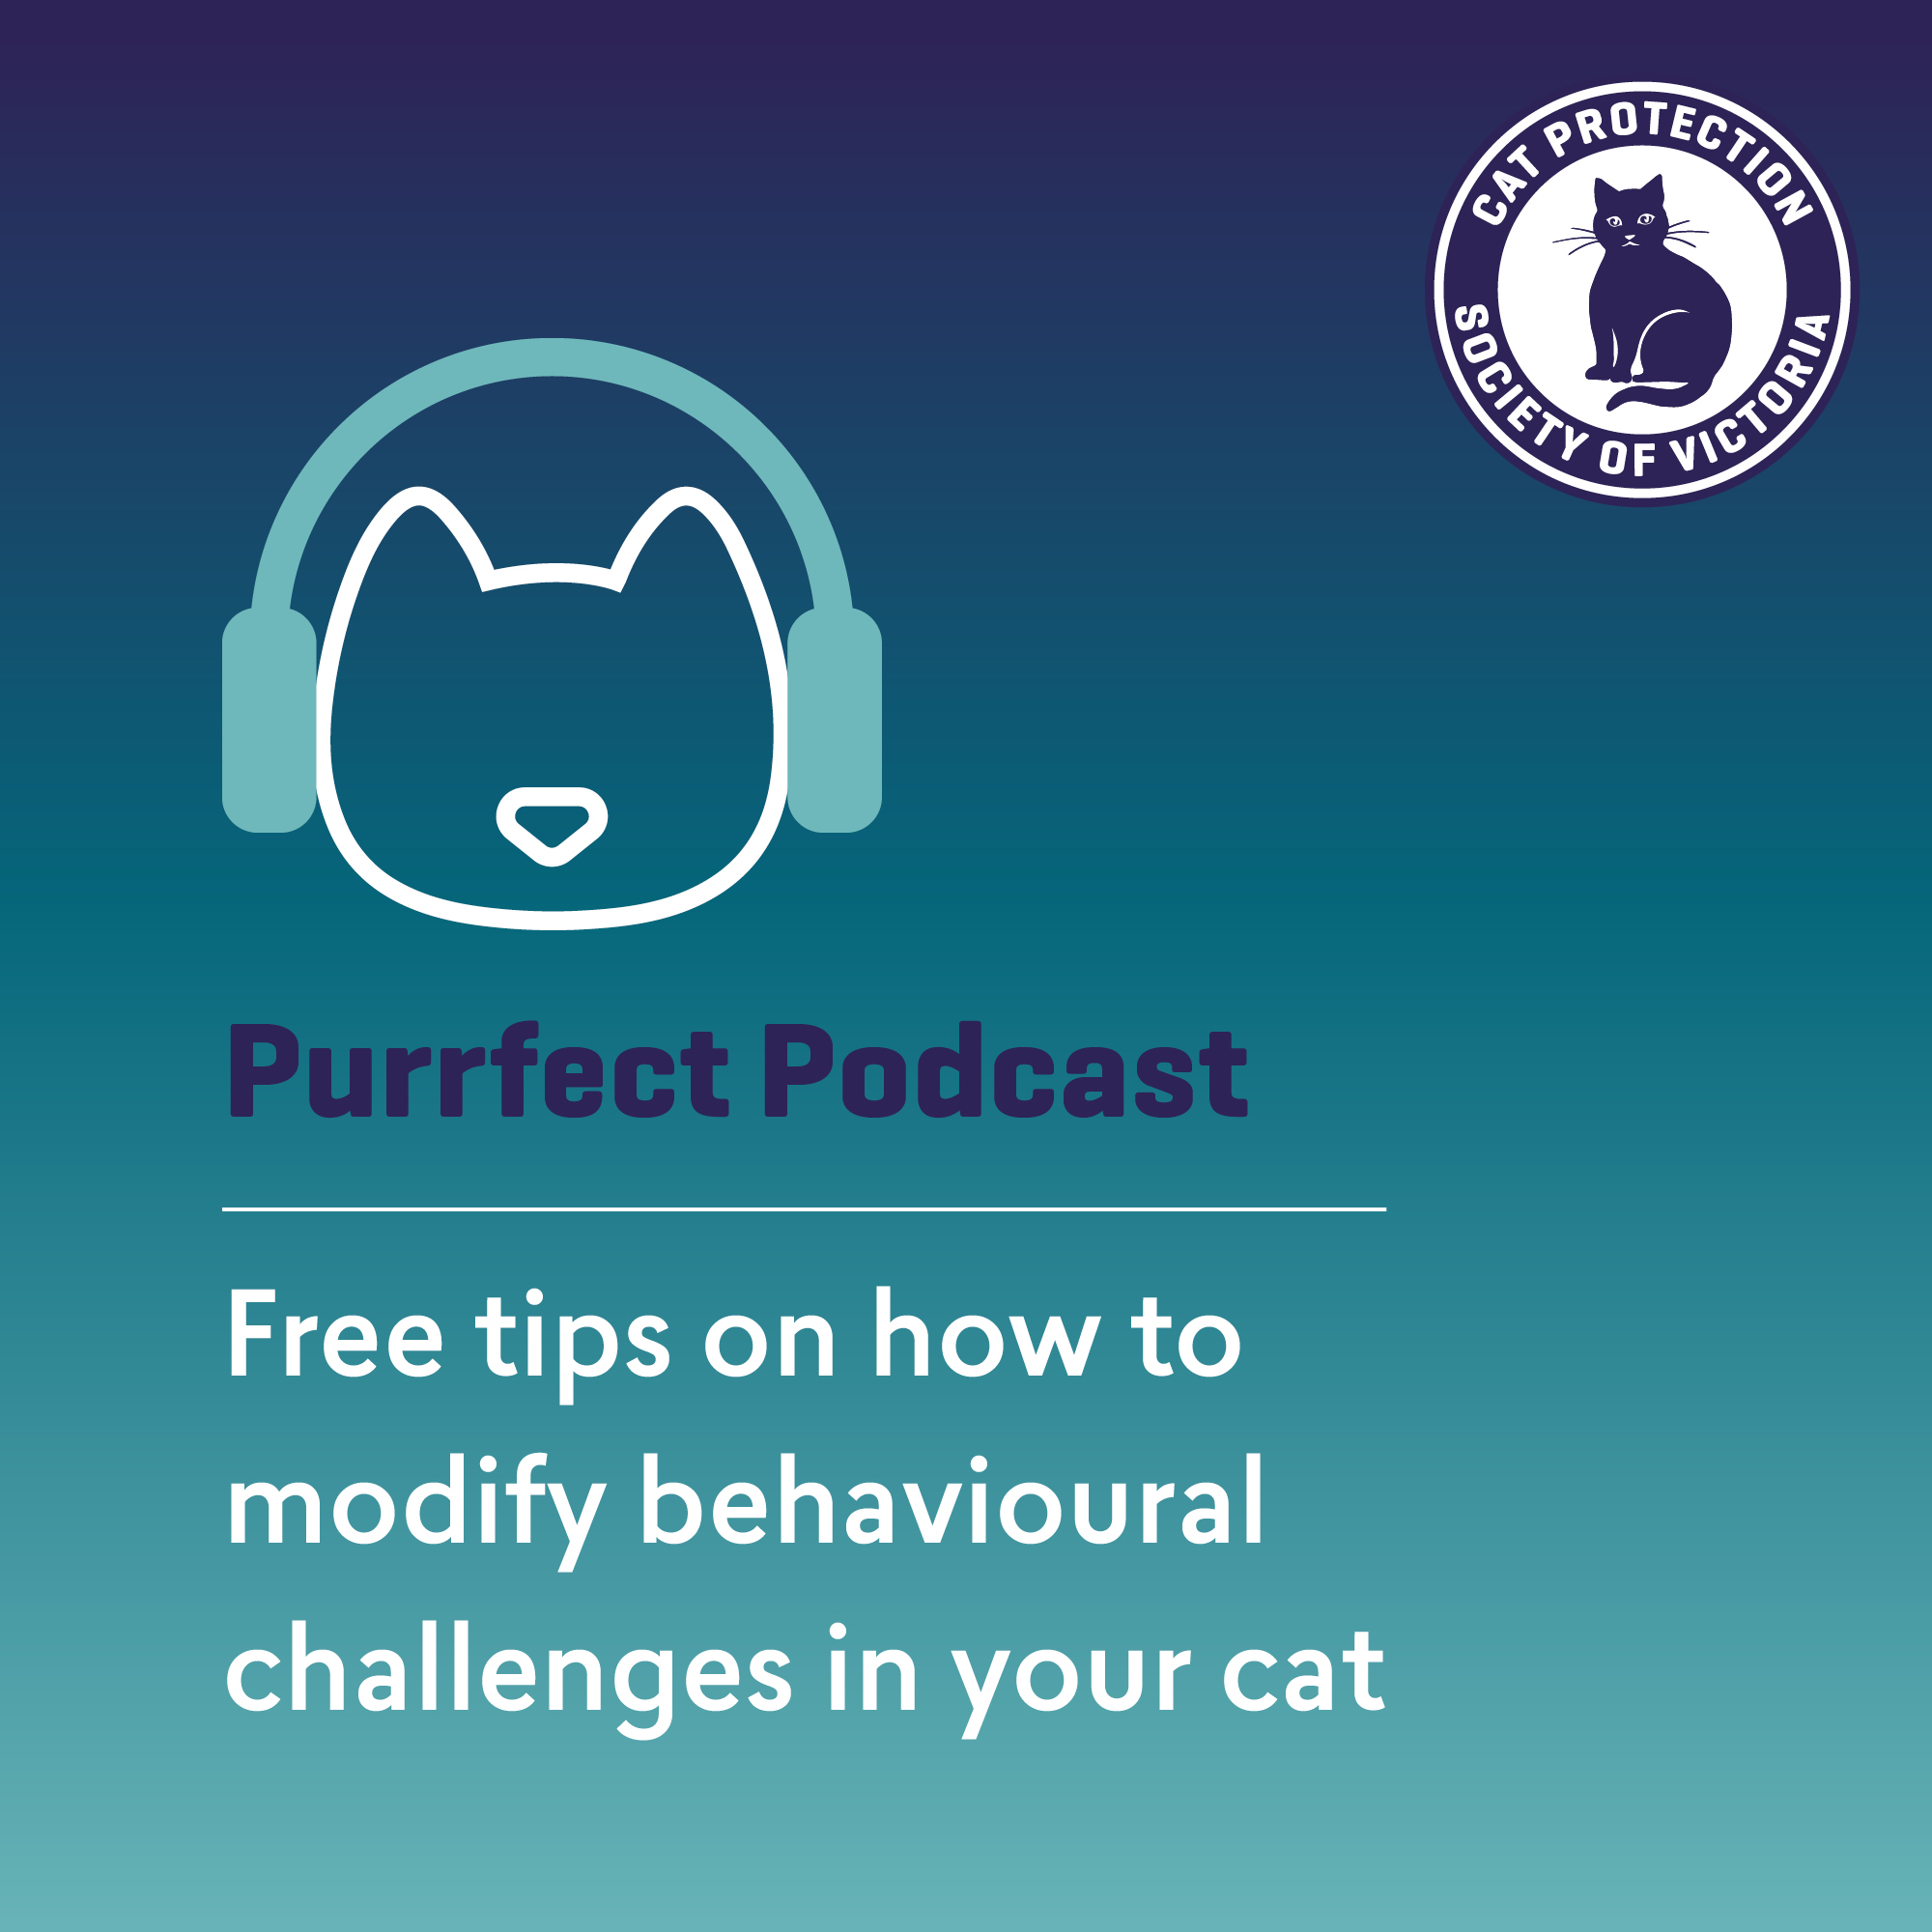 Free tips on how to modify behavioural challenges in your cat